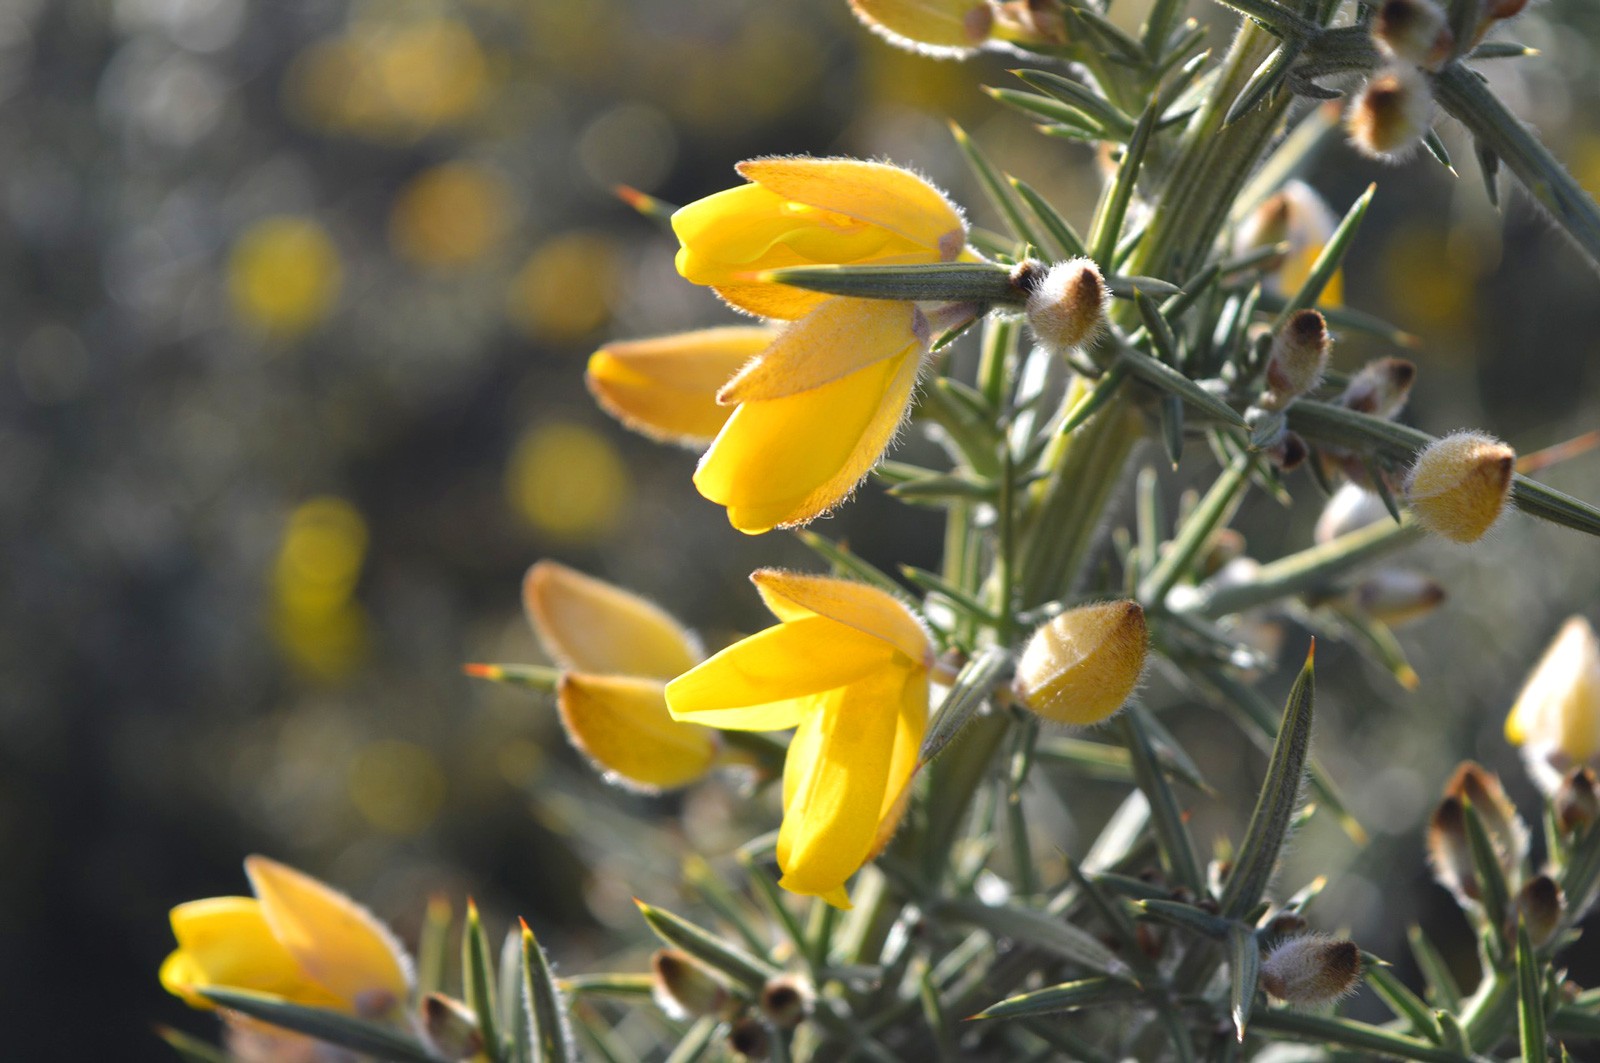 celtic meaning gorse, ogham tree meaning of gorse